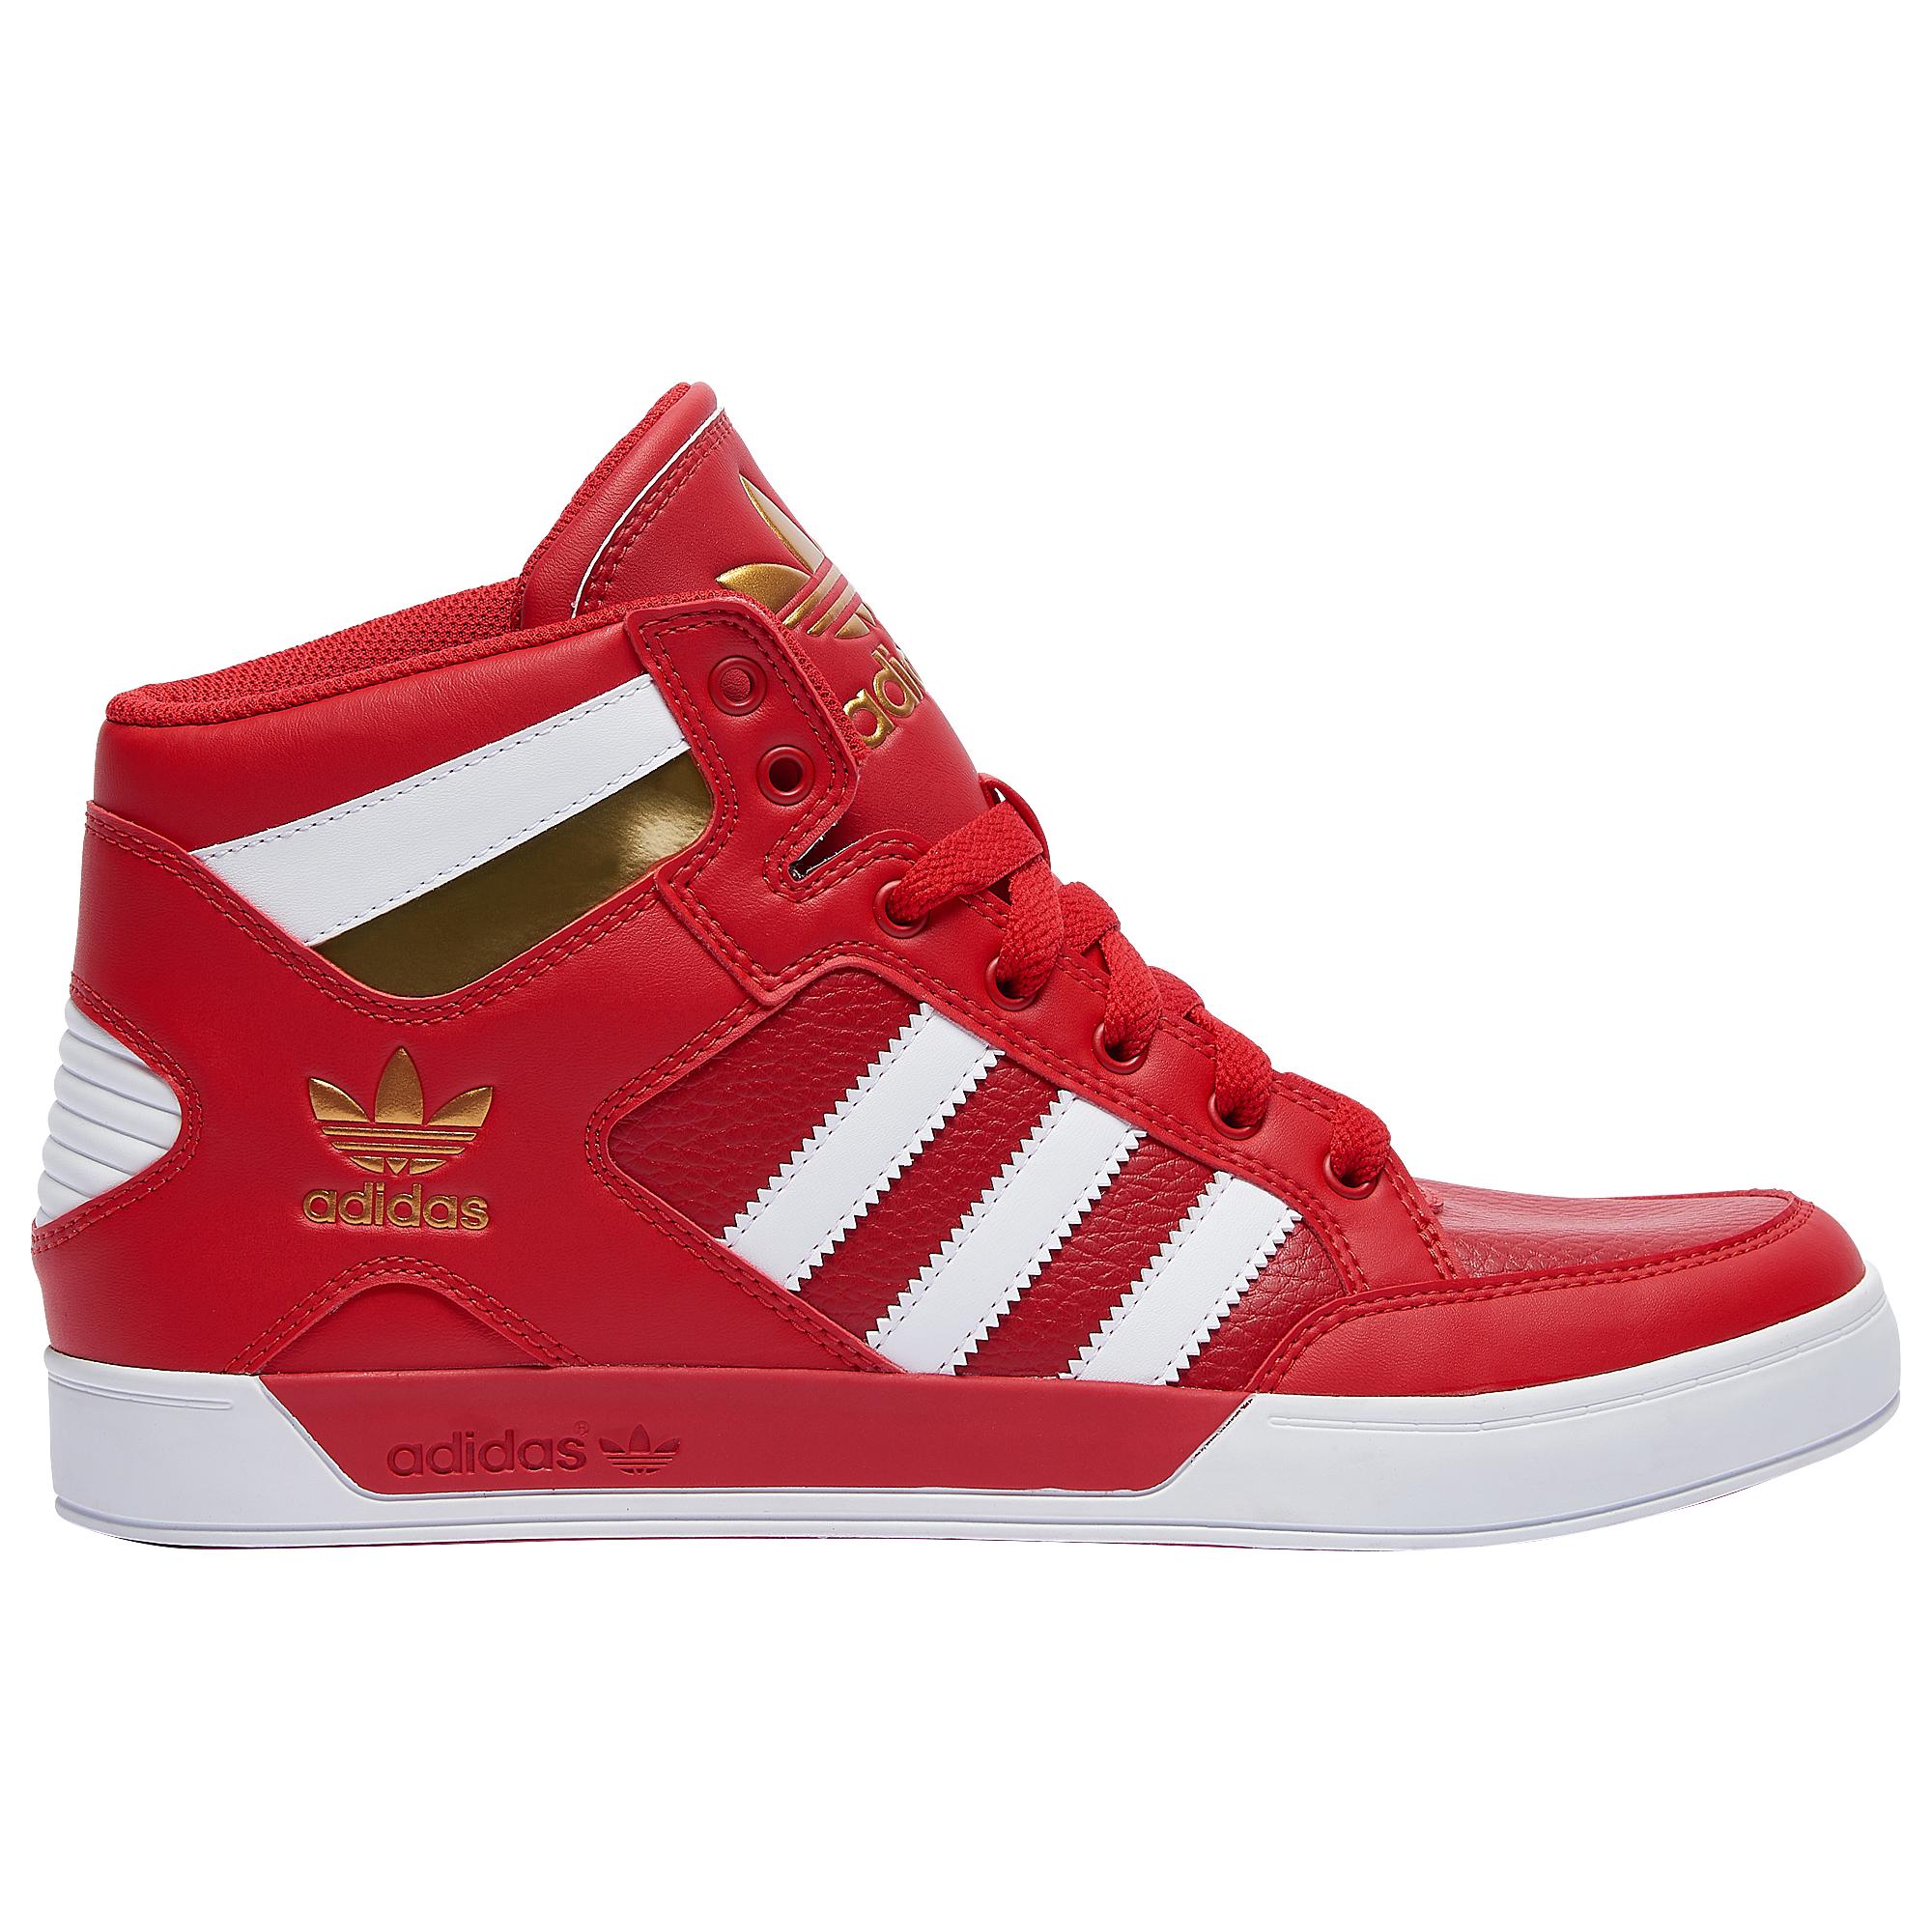 adidas Originals Leather Hardcourt - Shoes in Red/White/Gold Metallic ...